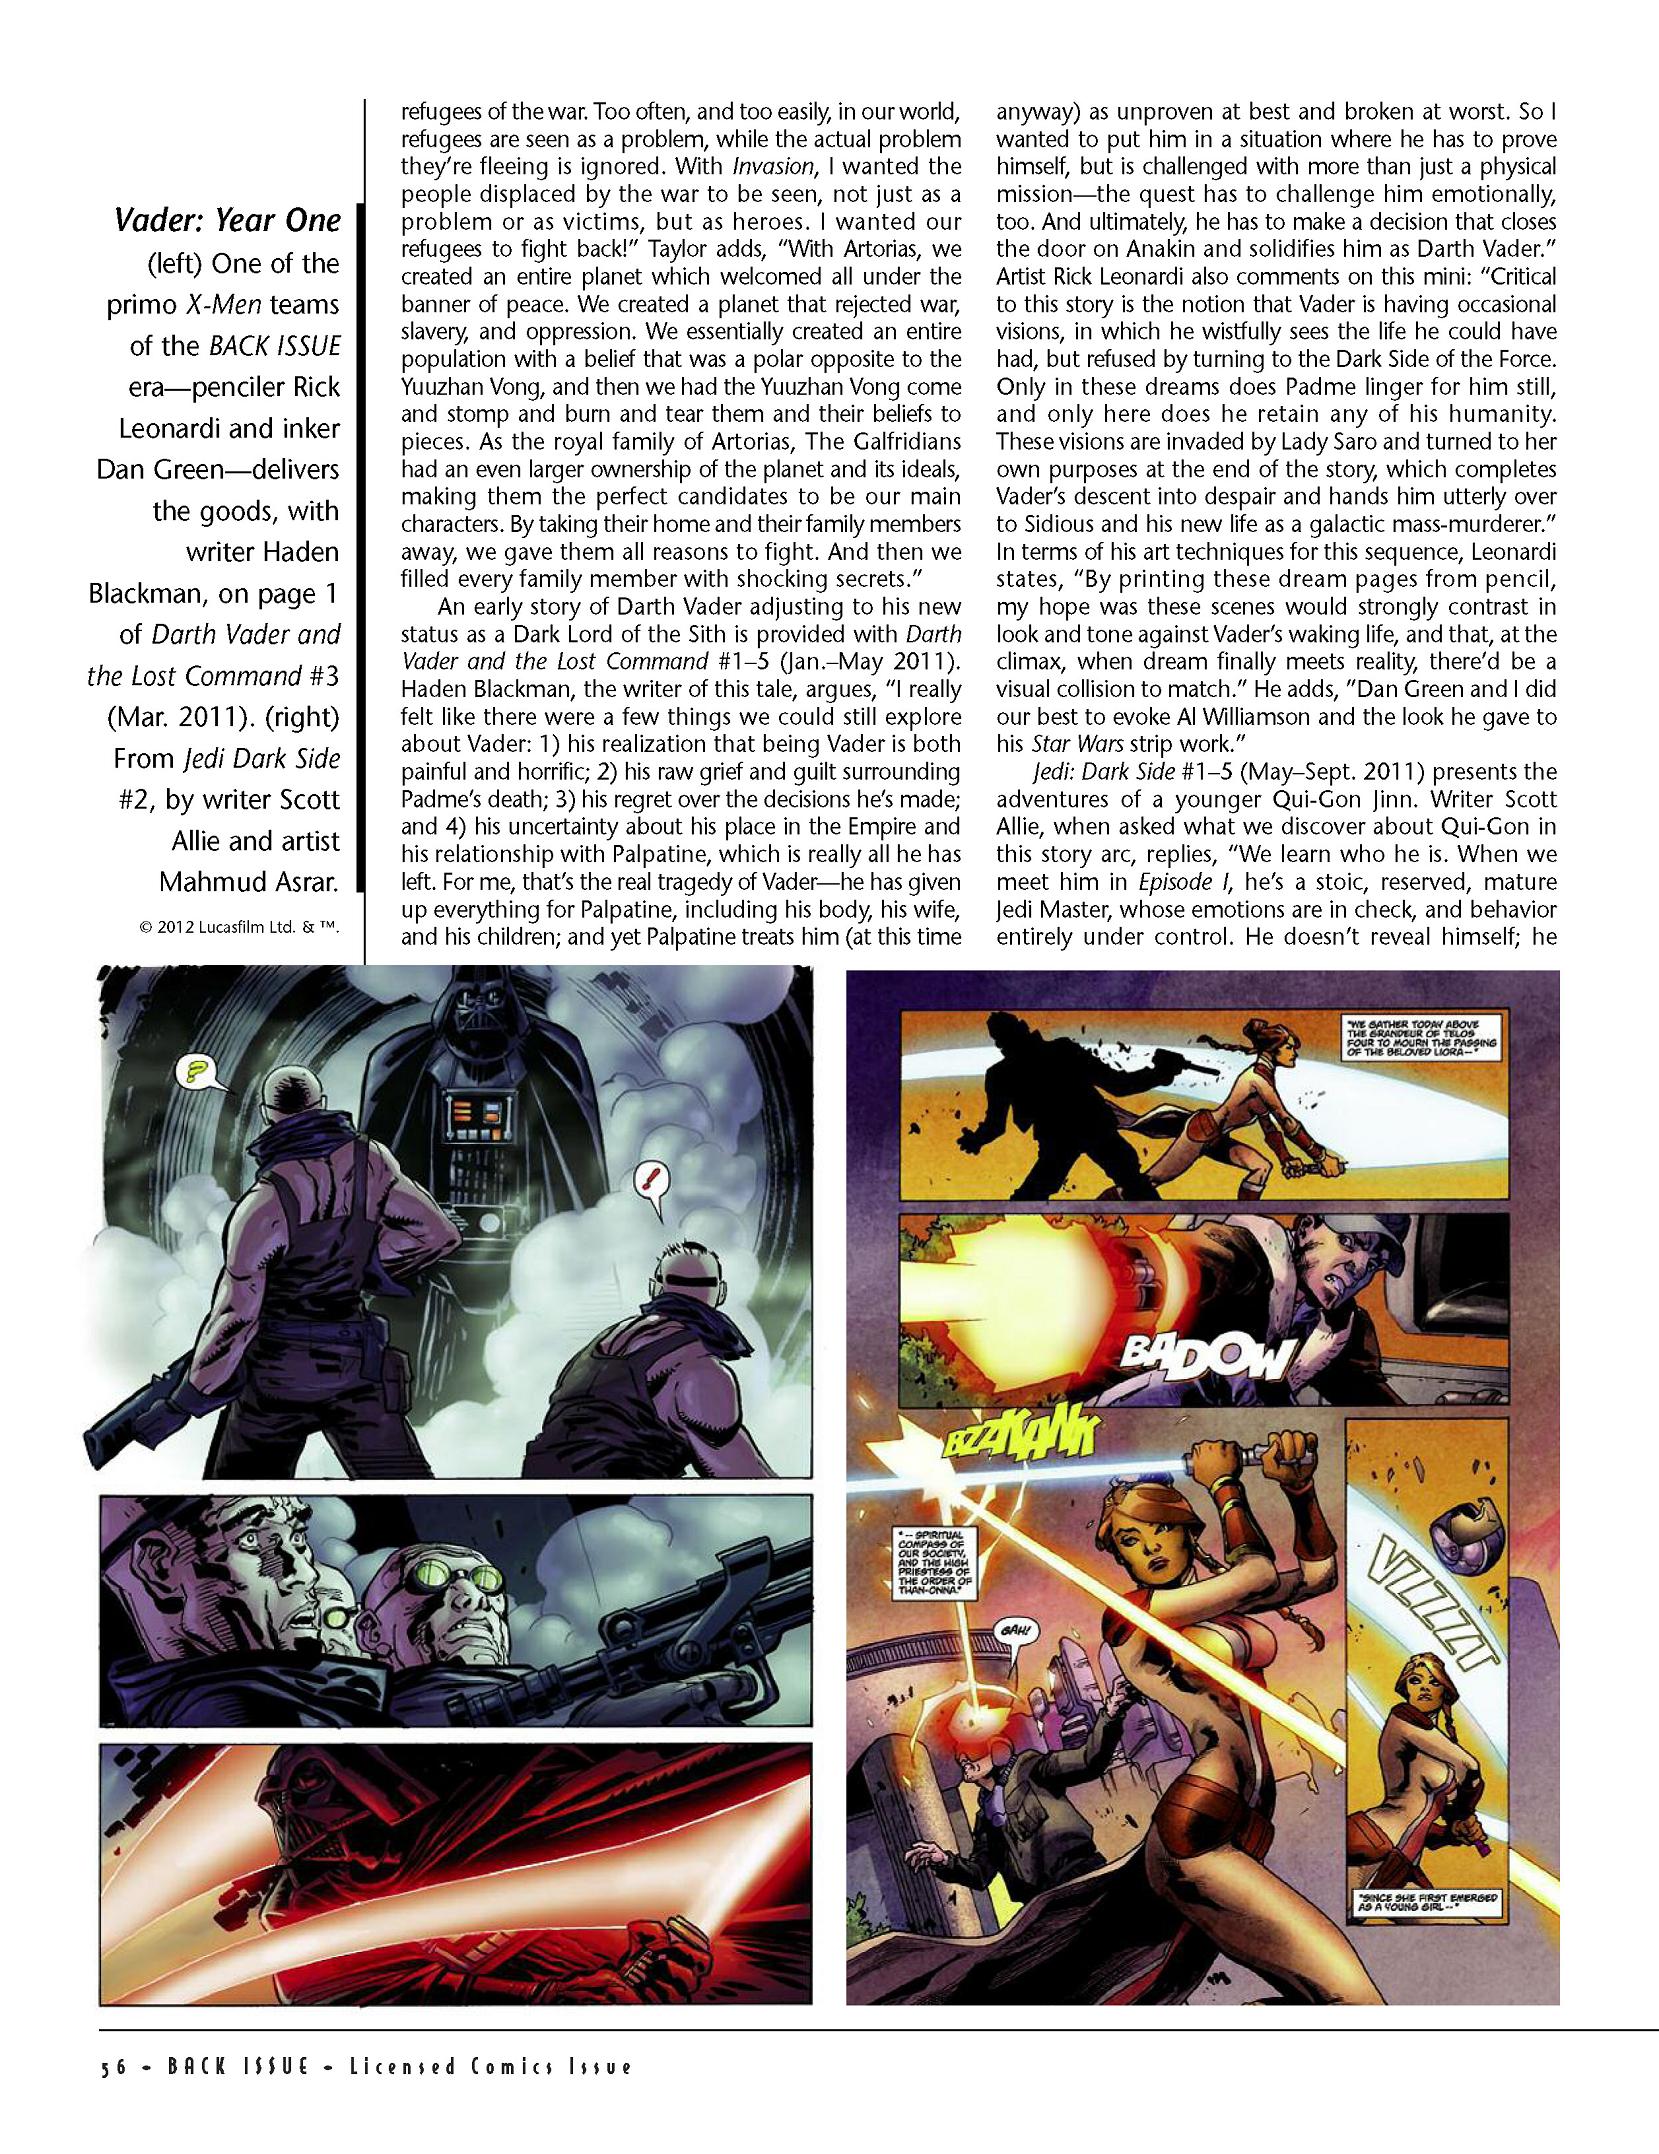 Read online Back Issue comic -  Issue #55 - 55